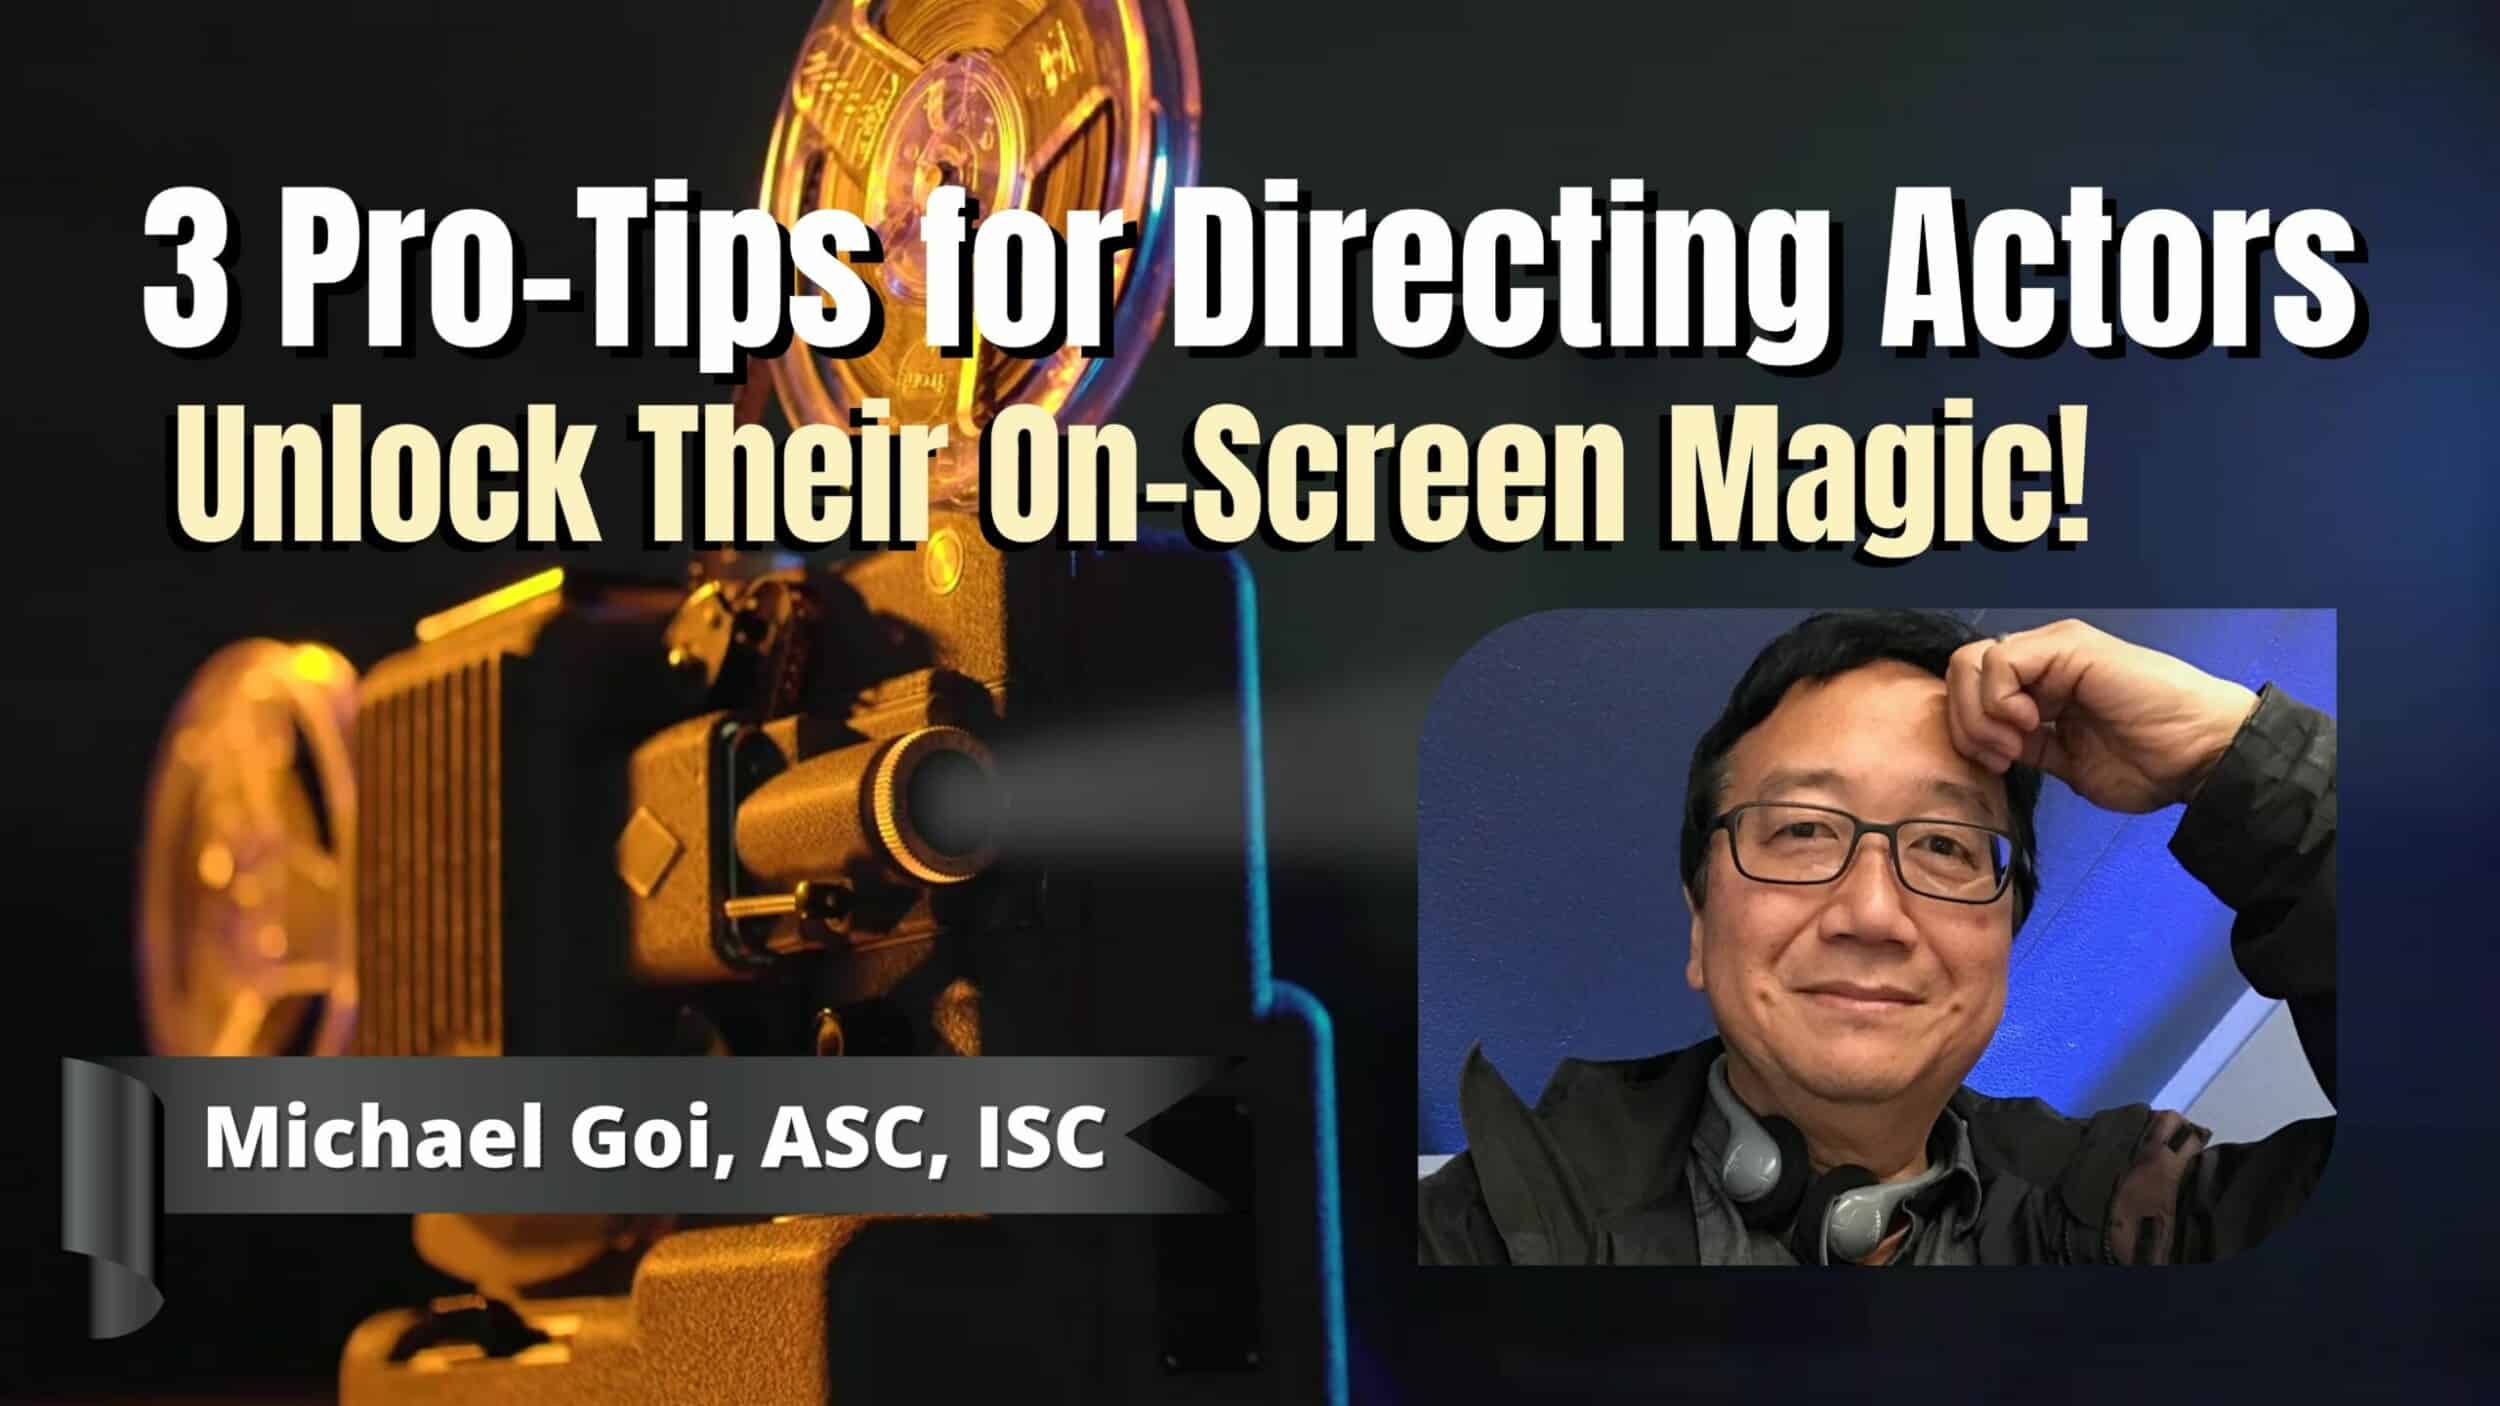 3 Pro-Tips for Directing Actors: Unlock Their On-Screen Magic! Exclusive Q&A with Michael Goi ASC, ISC